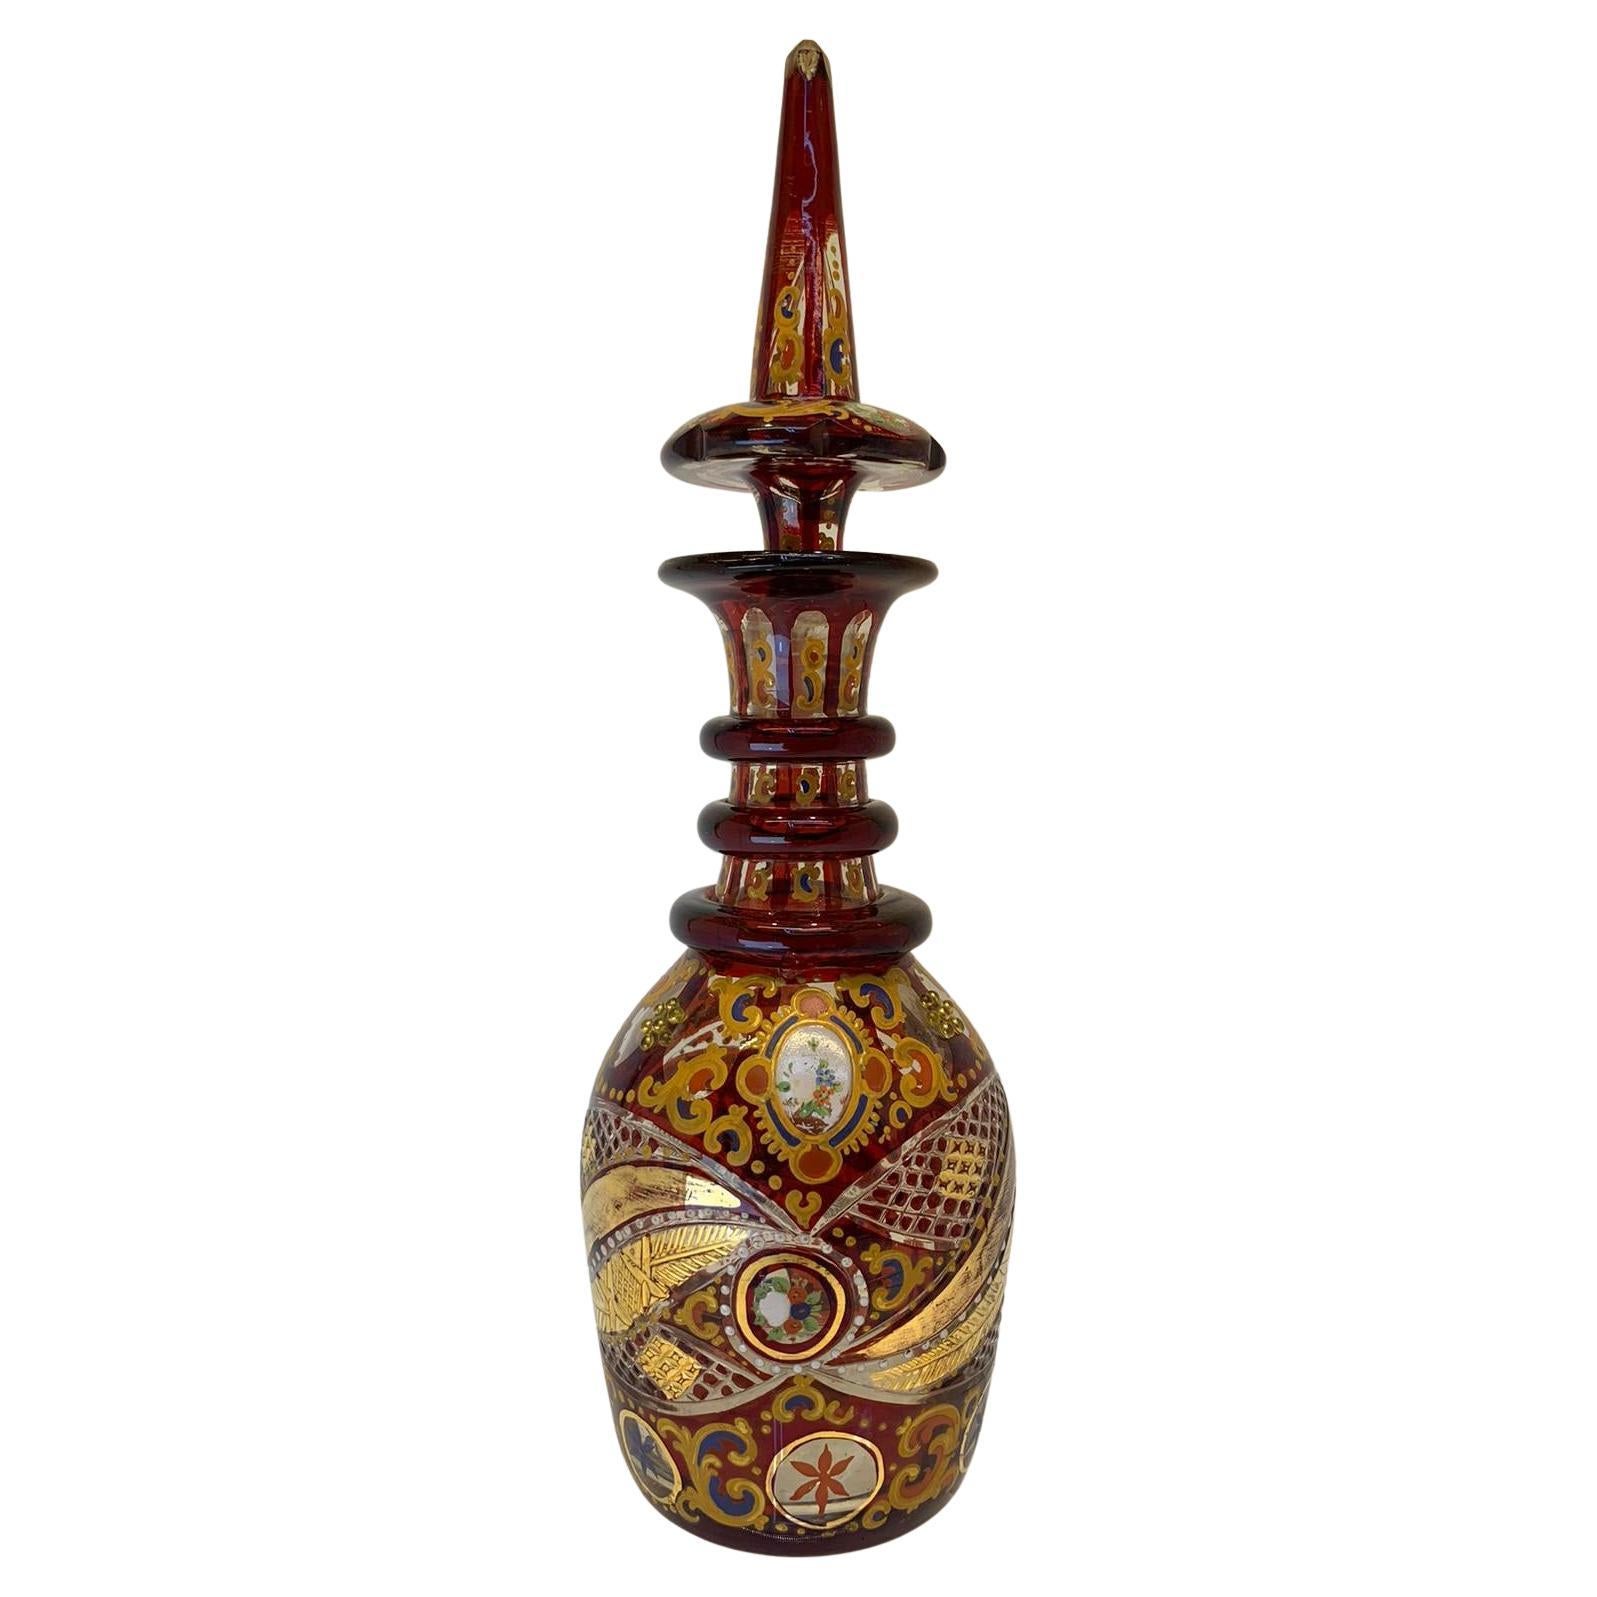 Antique Ruby Enamelled Glass Decanter, Bohemian for Islamic Market, 19th Century For Sale